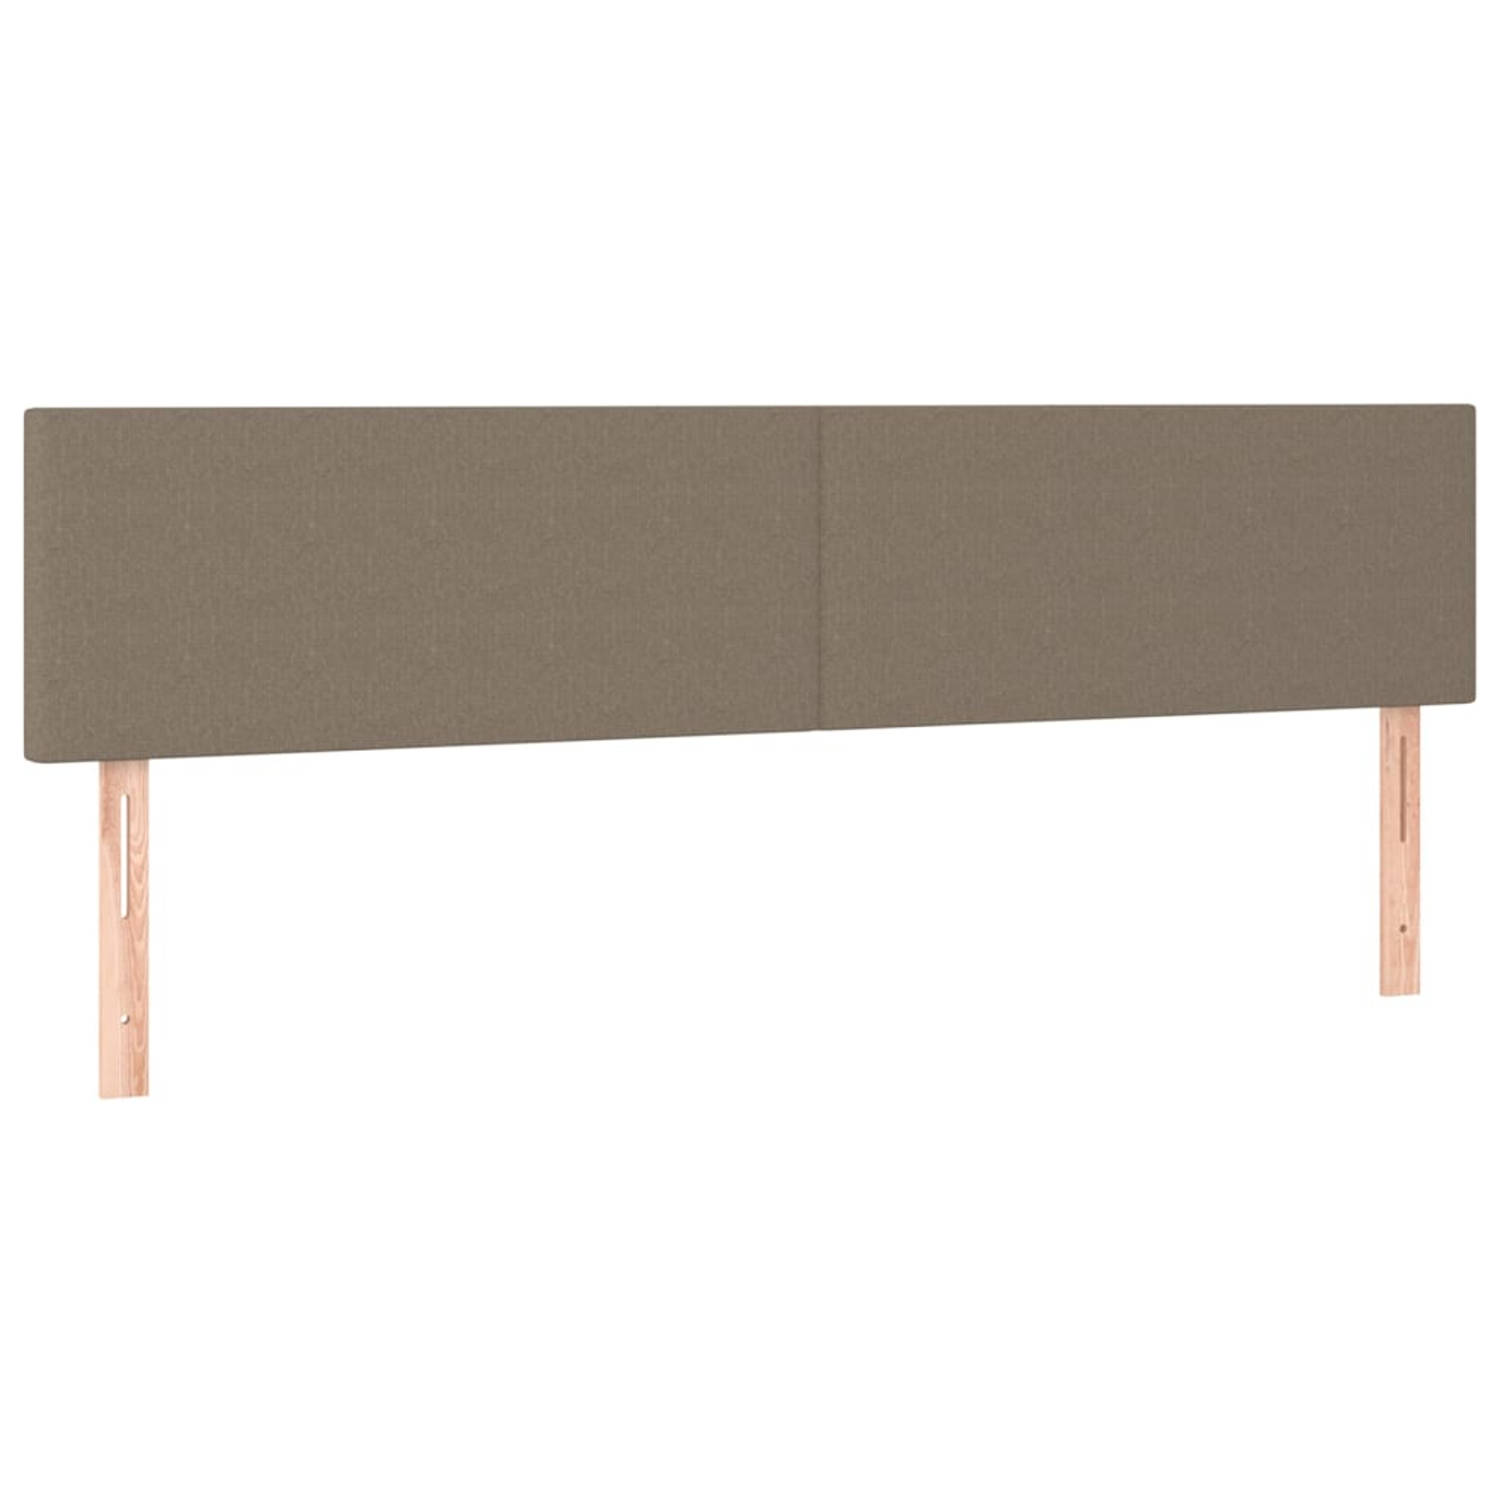 The Living Store Hoofdbord - The Living Store - Hoofdeind - 180 x 5 x 78/88 cm - Taupe - Stof - Hout